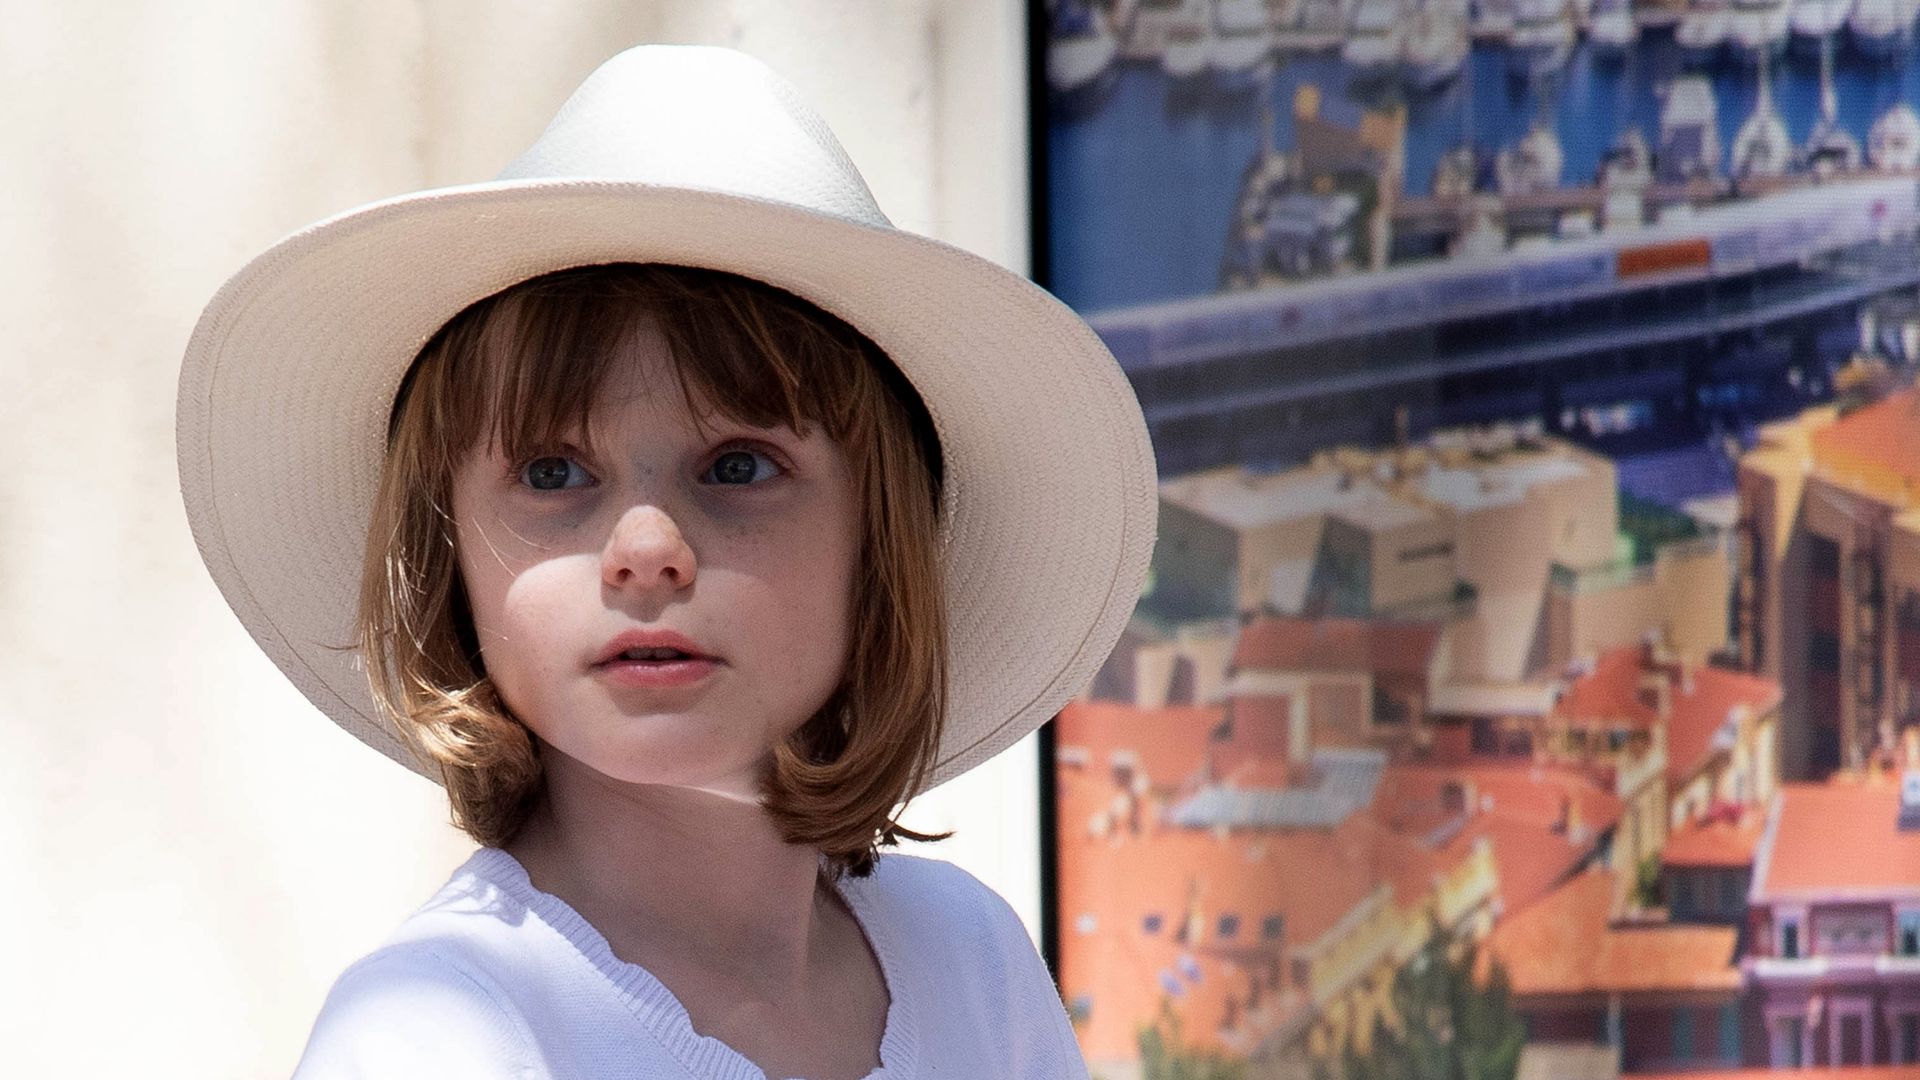 MONACO, MONACO - MAY 31: (EDITOR'S NOTE : NO TABLOIDS WEB & PRINT, NO DAILY MAIL, NO DAILY MAIL GROUP, NO VOICI, NO CLOSER) Princess Gabriella of Monaco takes part in a painting workshop during celebrations to mark the birth of the late Rainier III in Monaco on May 31, 2023. (Photo by Pierre Villard/SC Pool - Corbis/Corbis via Getty Images)